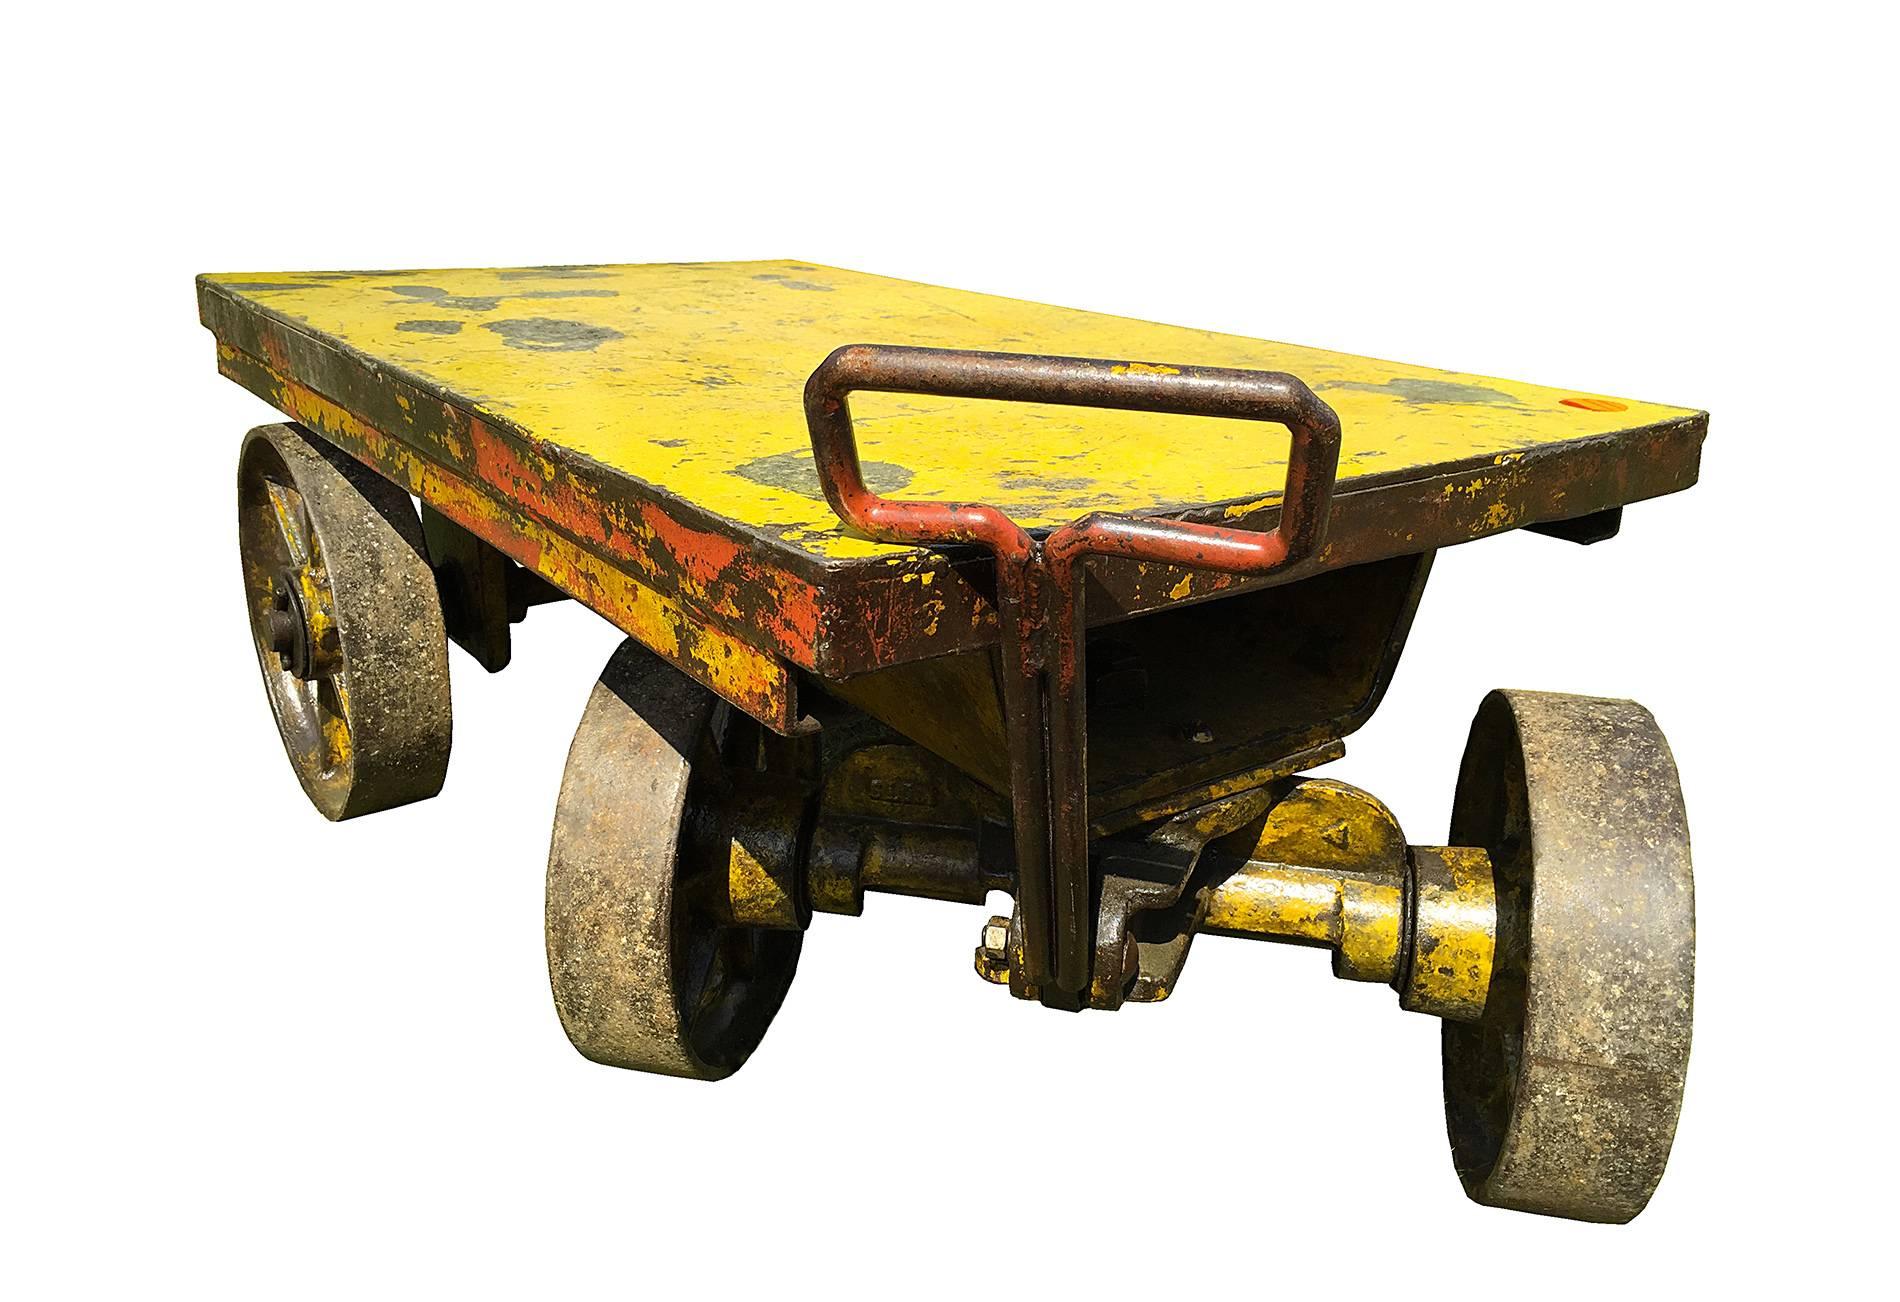 Iron and cast iron industrial wheelbarrow , rectangular shape , with 4 big wheels (11” diameter) and a long handle that allowing the front wheels to rotate . The top shelf has a thickness of 4 “ .